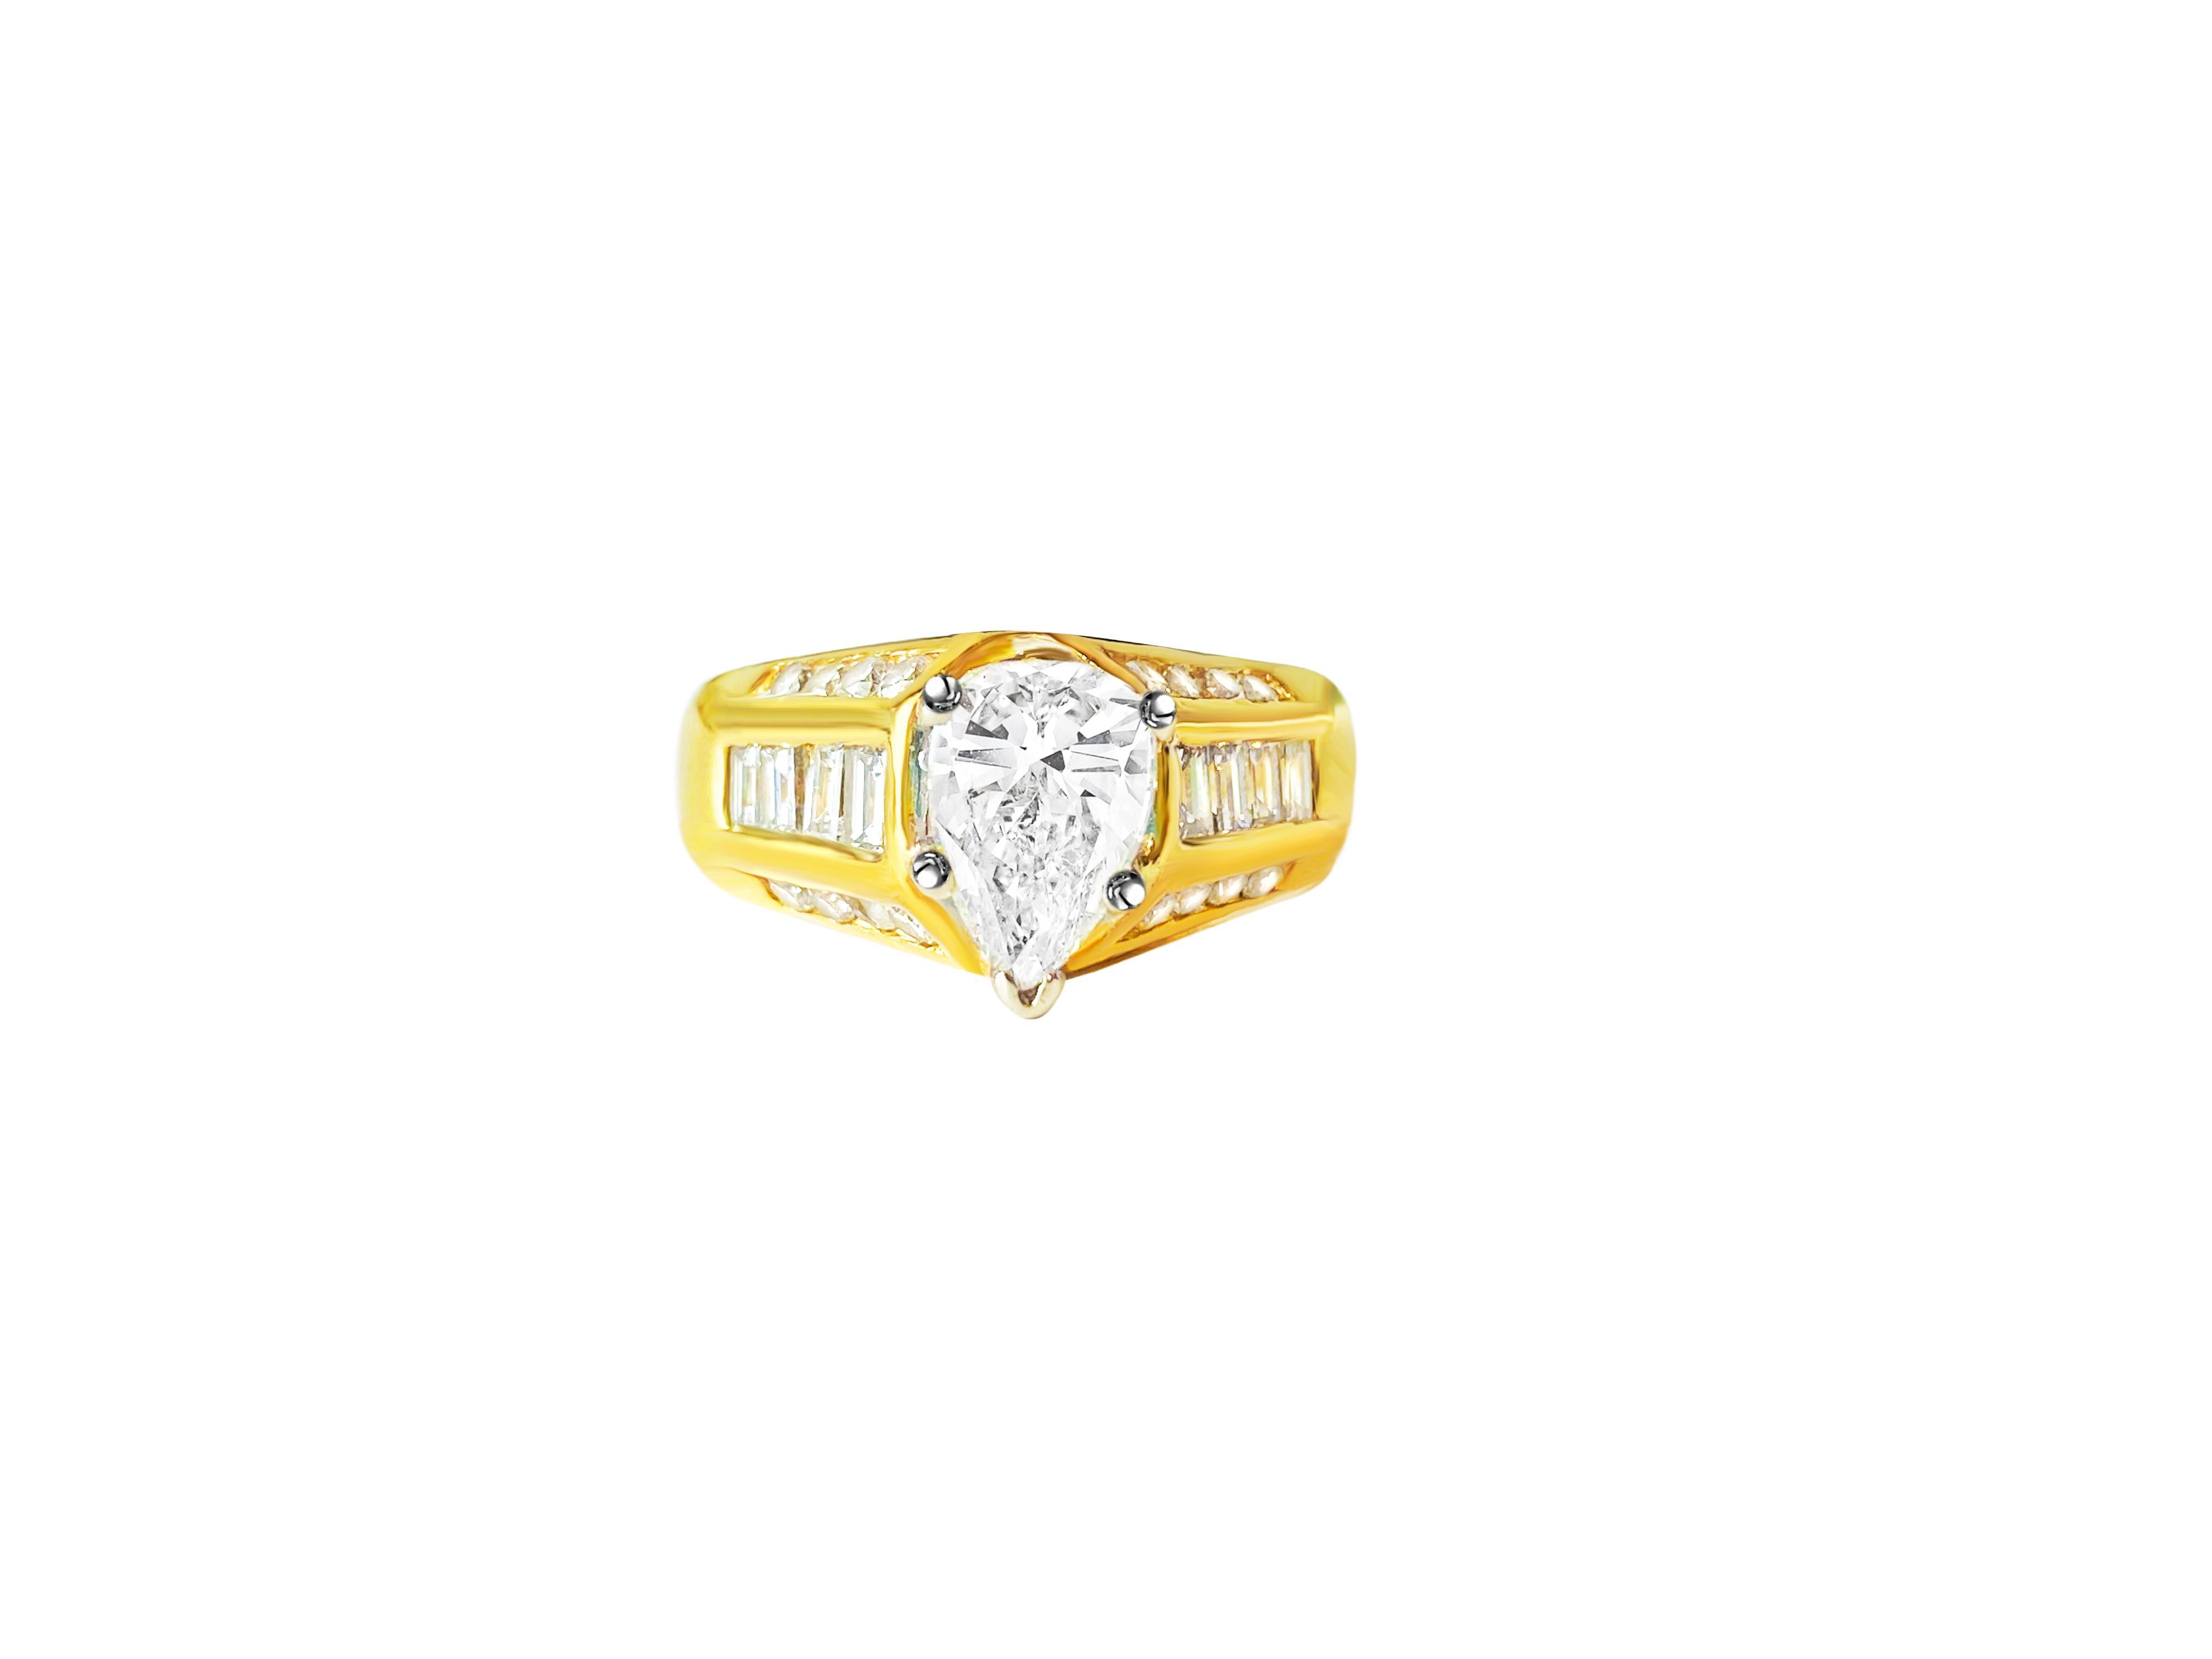 Contemporary *GIA* 2.00 CT Diamond Engagement Ring in 18K Gold. For Sale